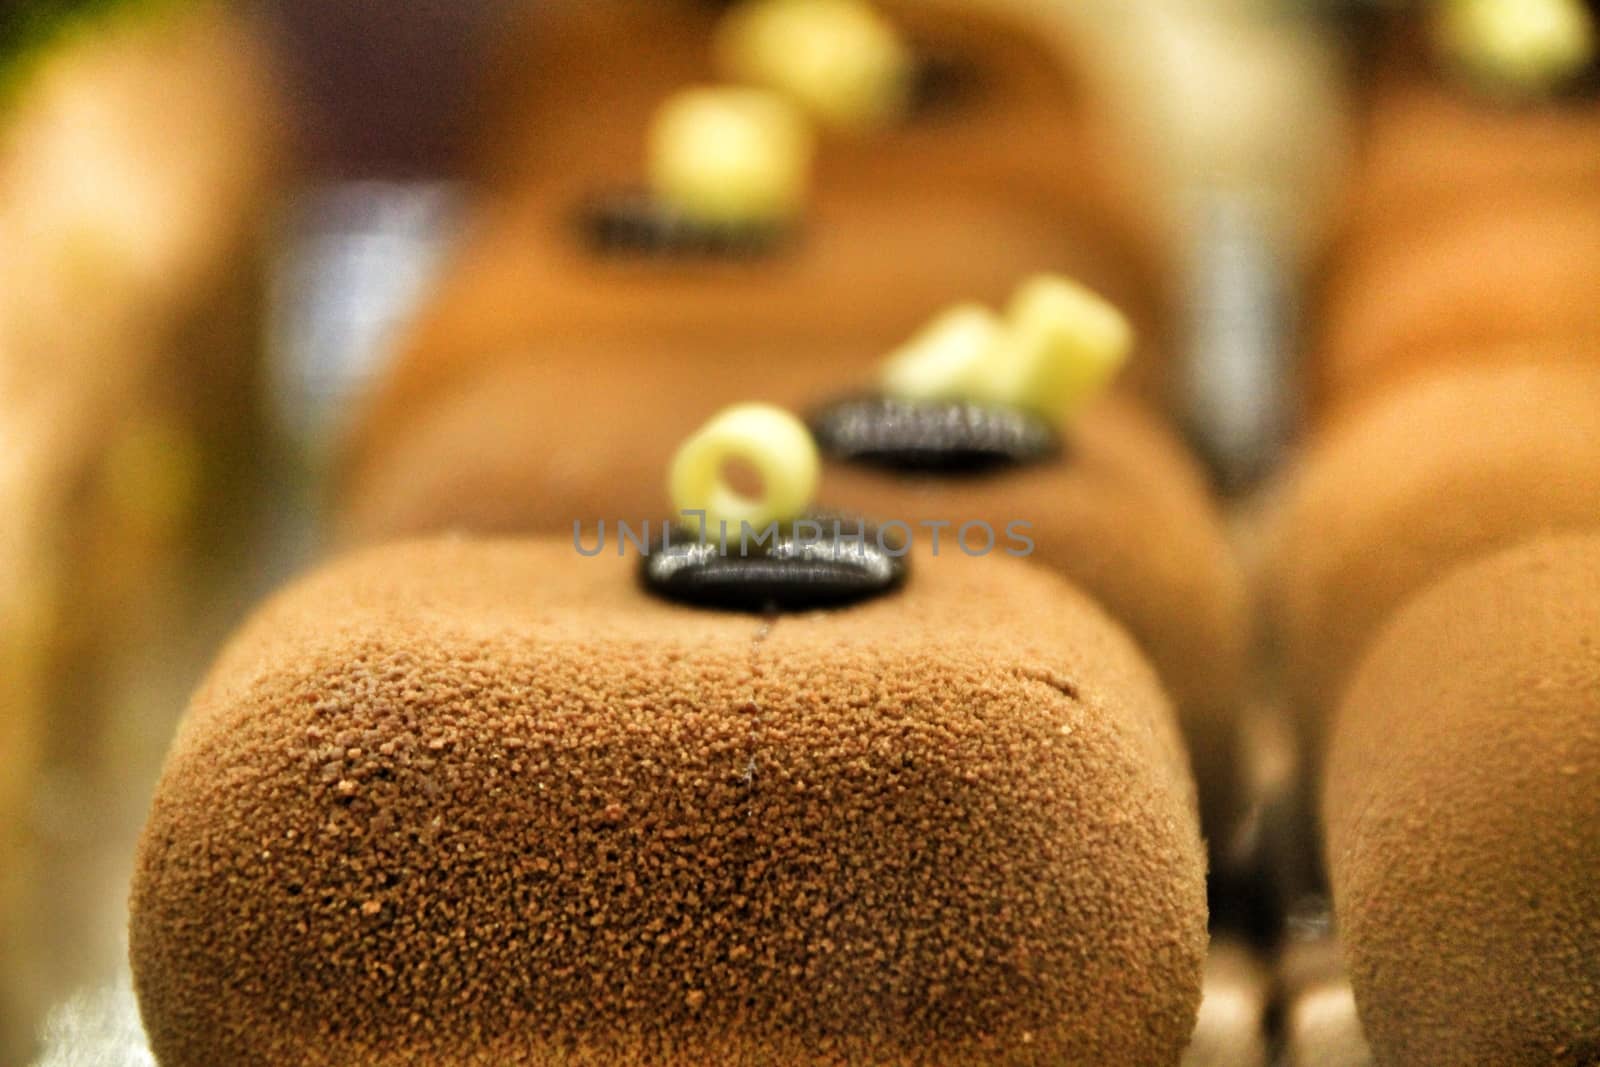 Delicatessen squared Chocolate cakes in a pastry shop by soniabonet